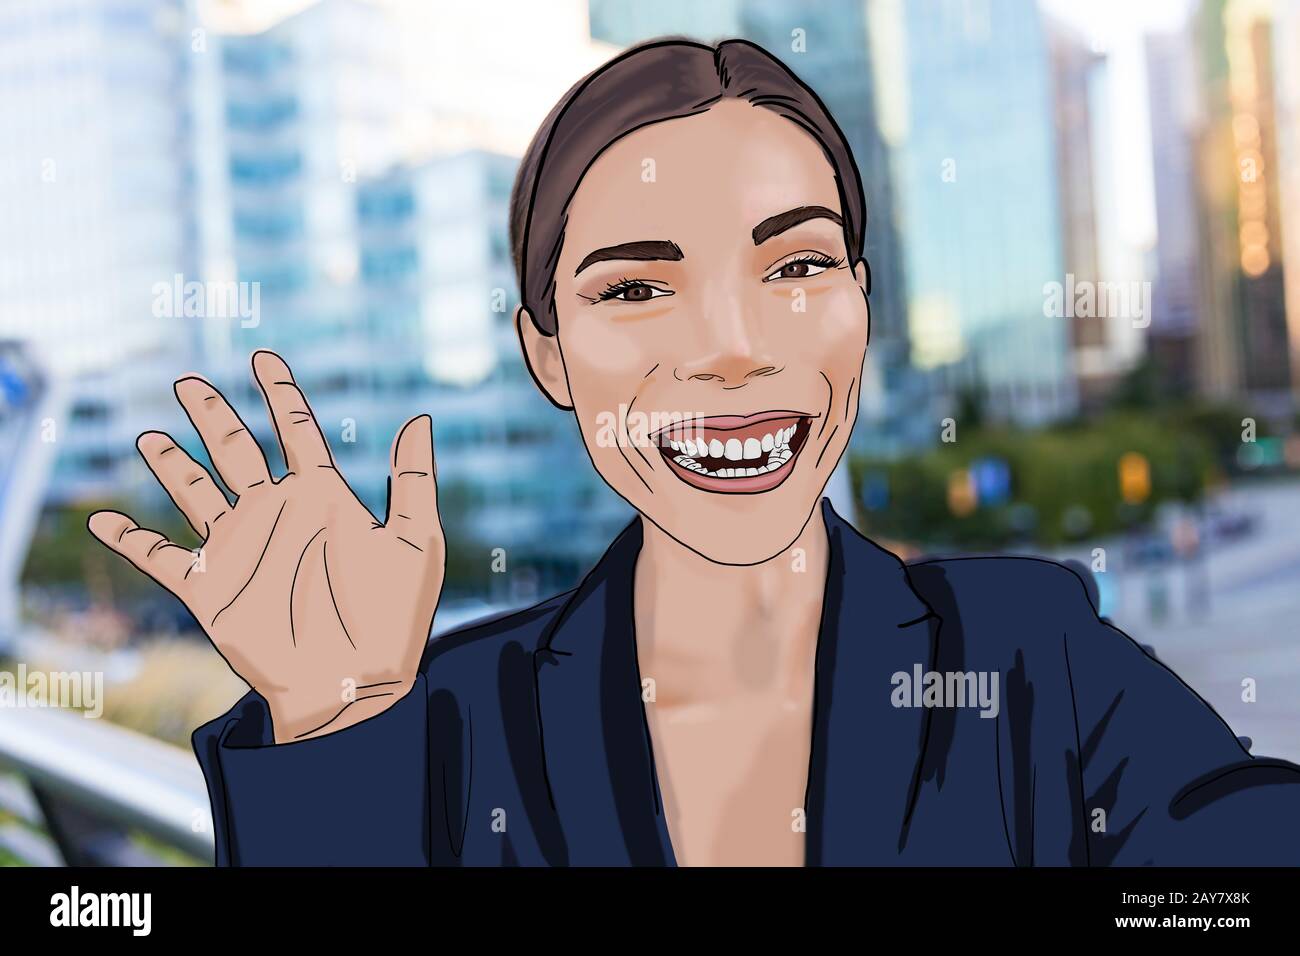 Vector Illustration of a professional smart business woman. Vector